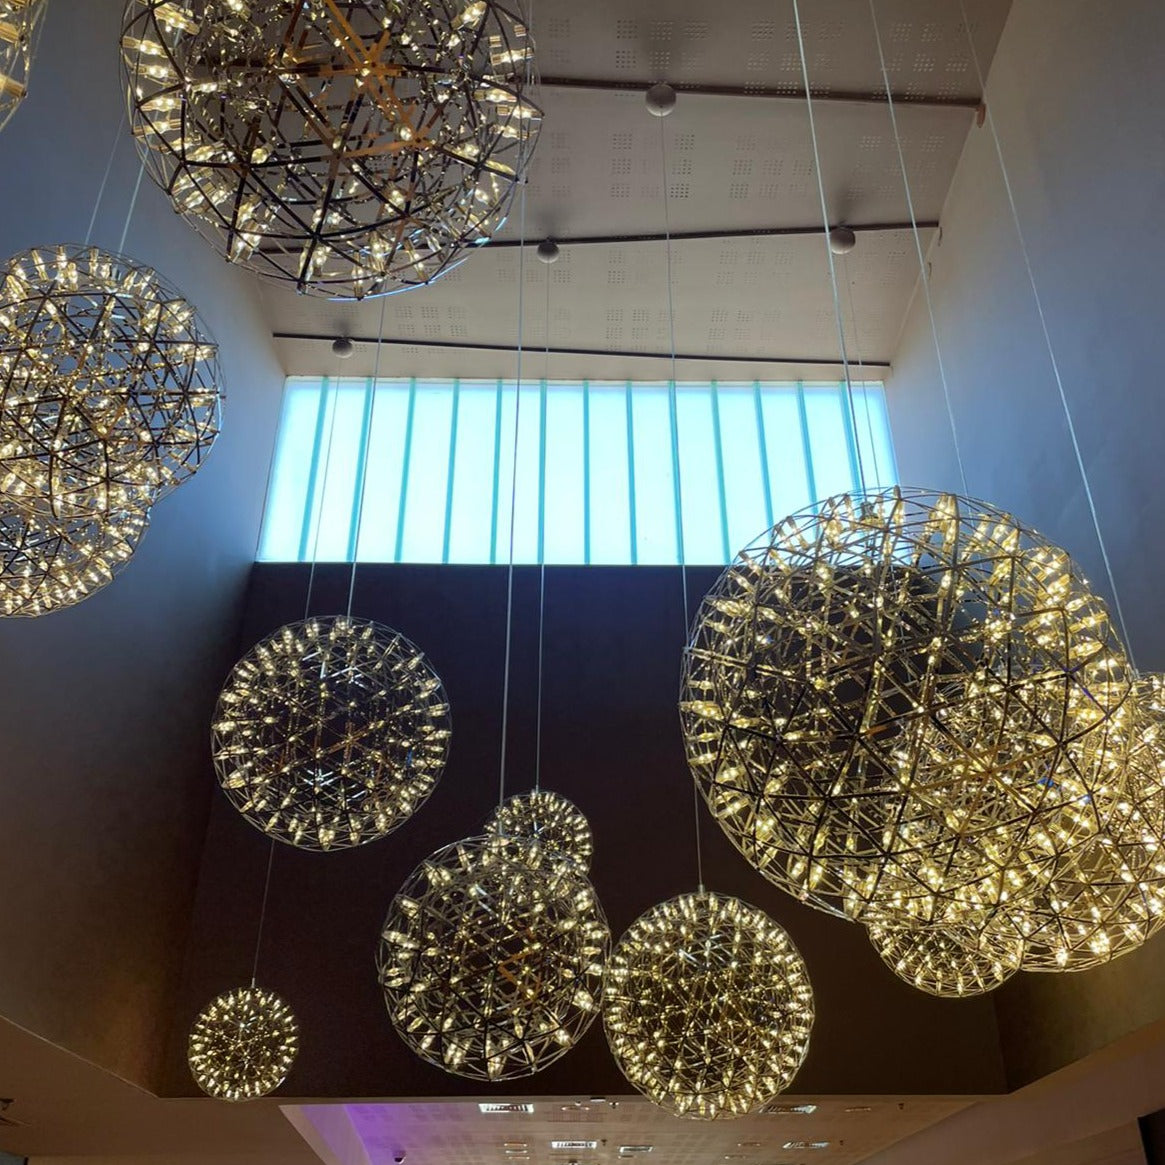 This LED starburst sparkle pendant light will create a talking point in any space and can be placed together with the other size starburst lights to create something truly spectacular